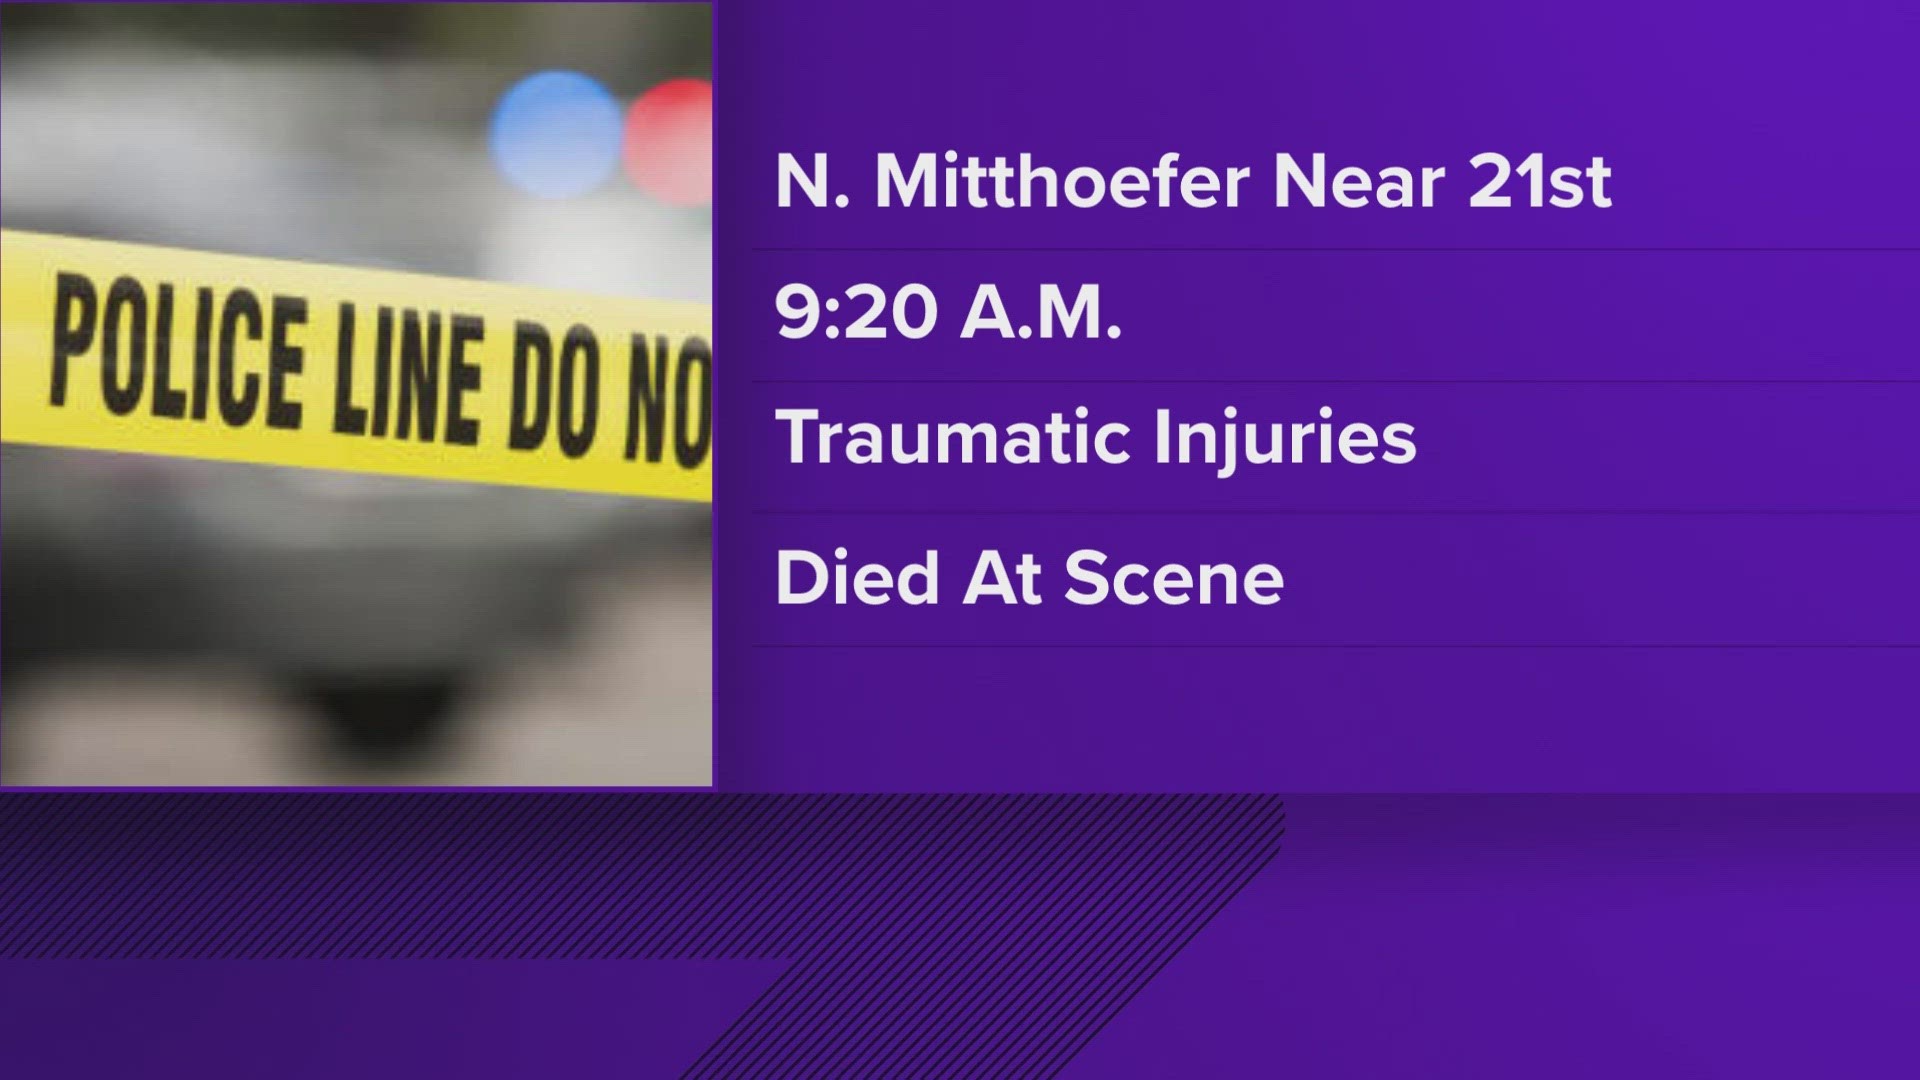 Around 9:30 a.m. Saturday, officers found the woman injured in a parking lot near 21st and Mitthoeffer. She died at the scene.